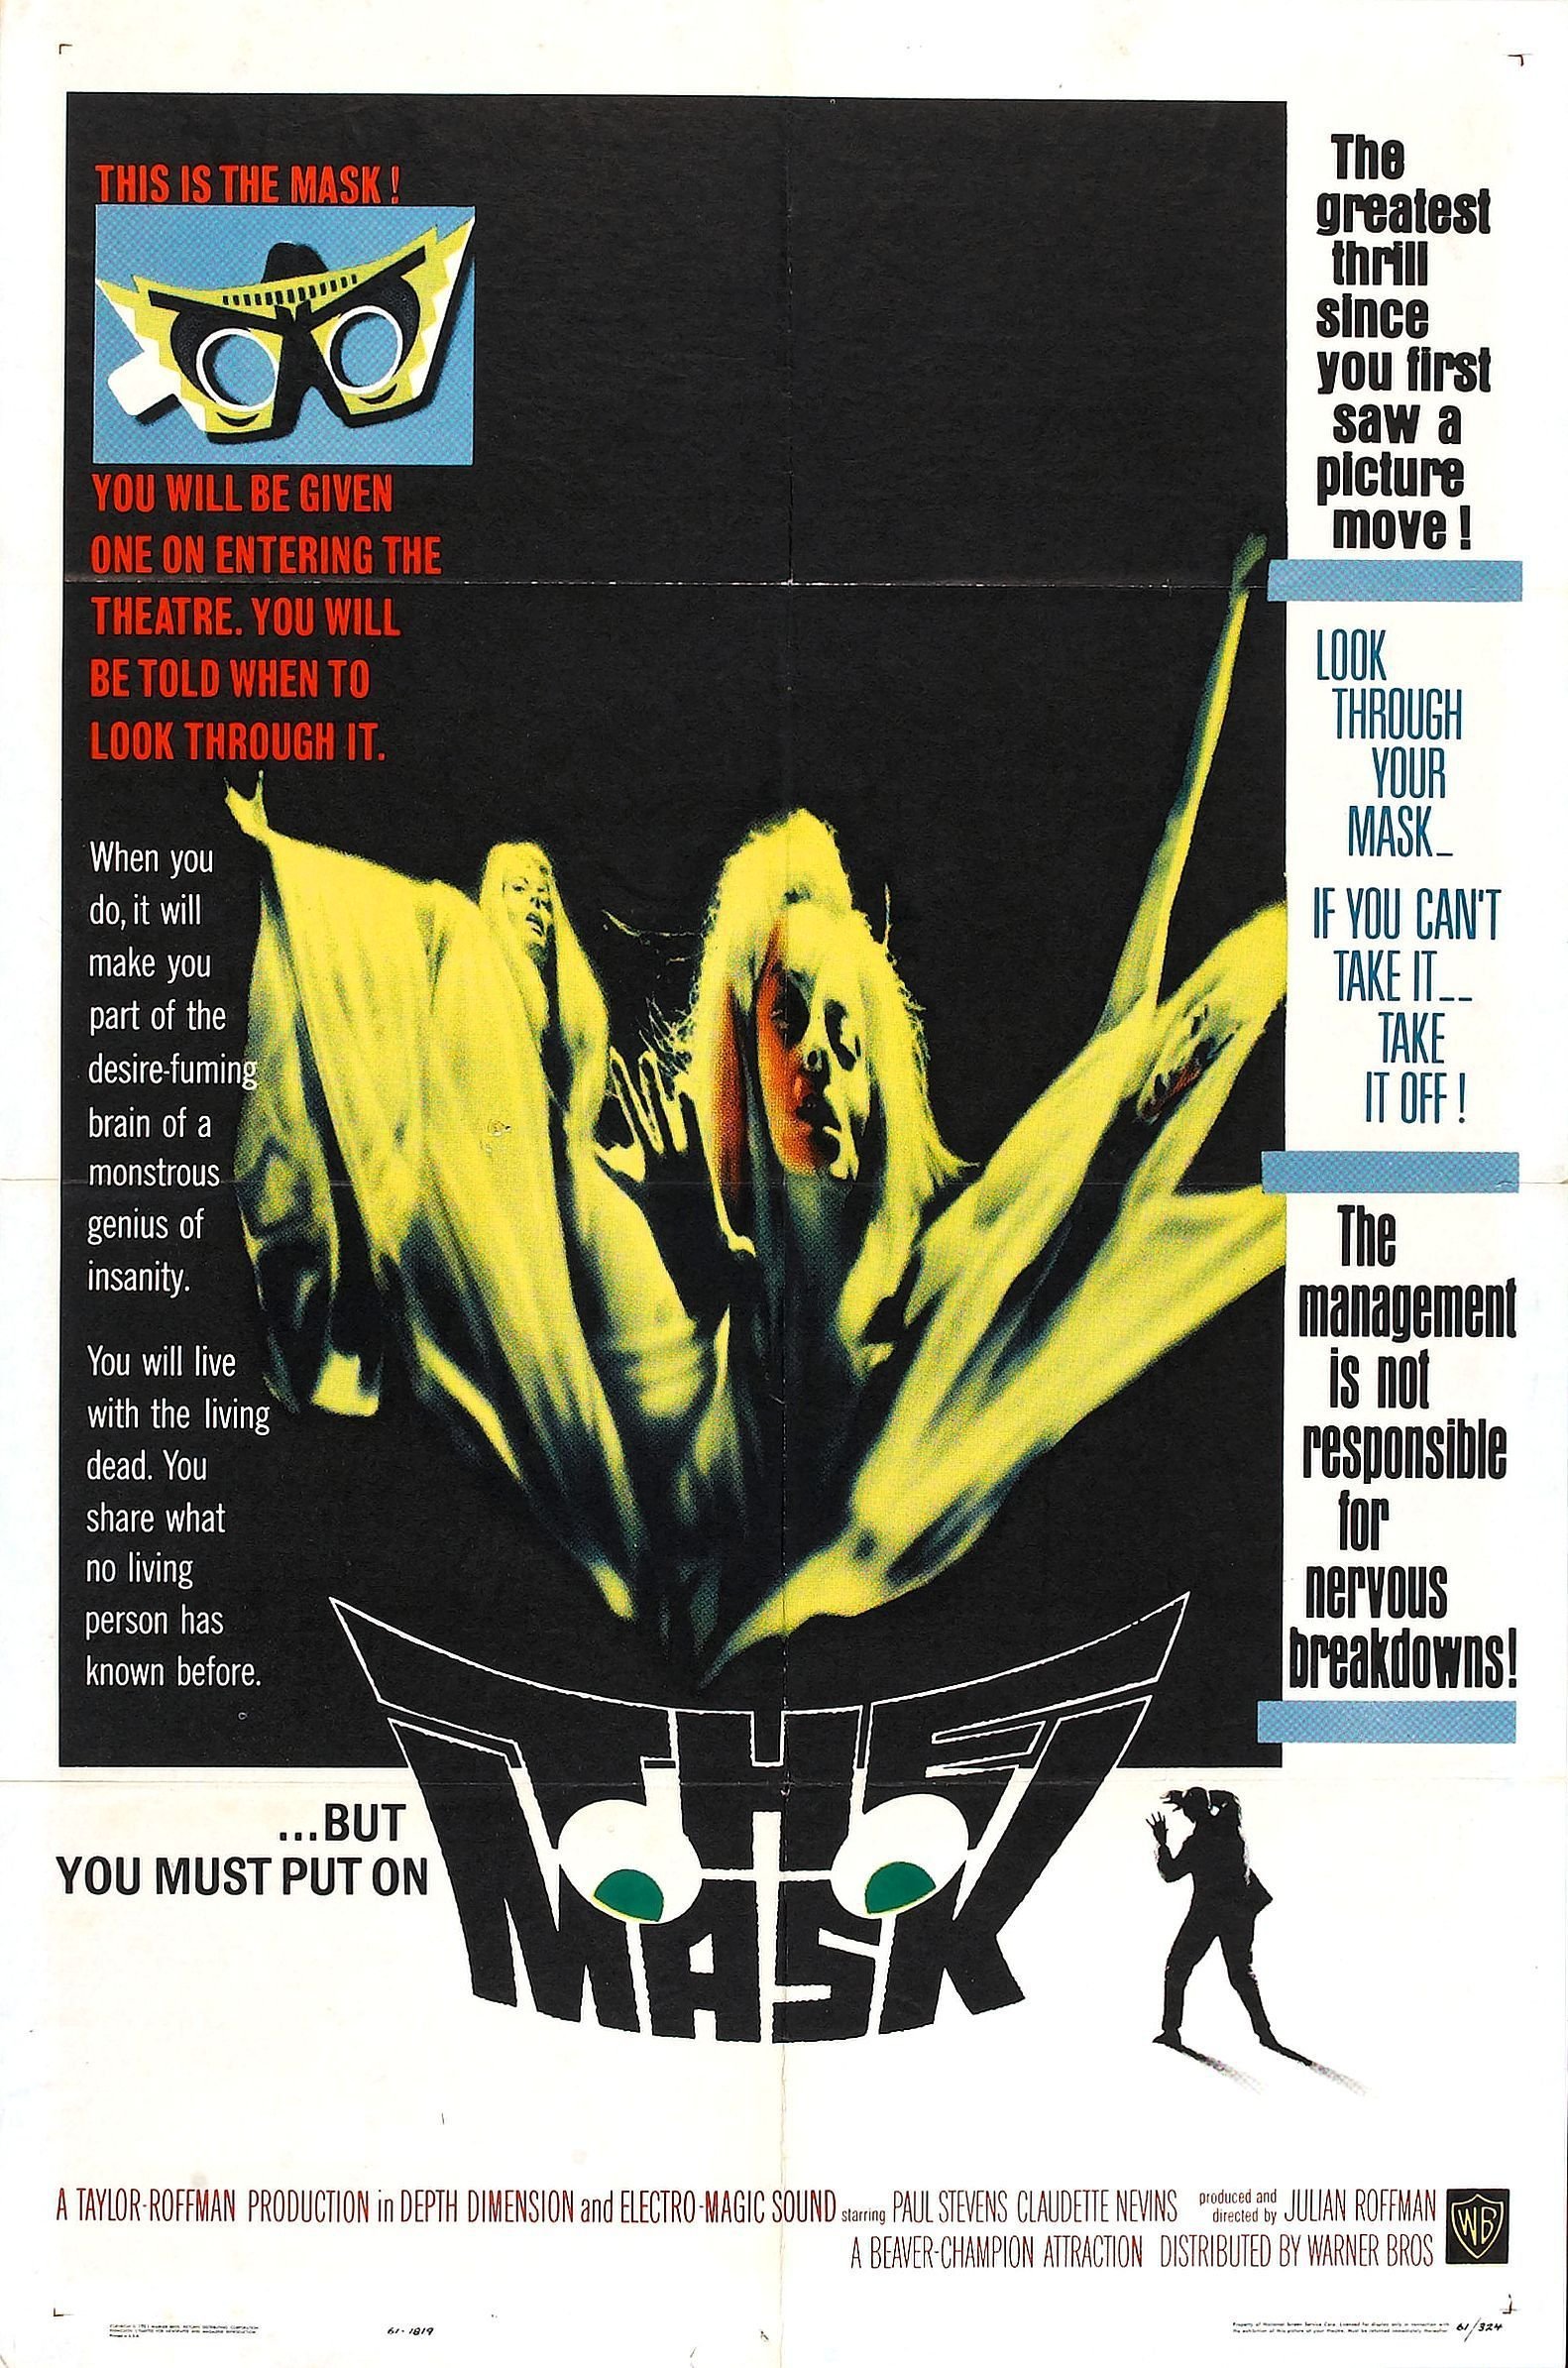 Poster of the movie The Mask